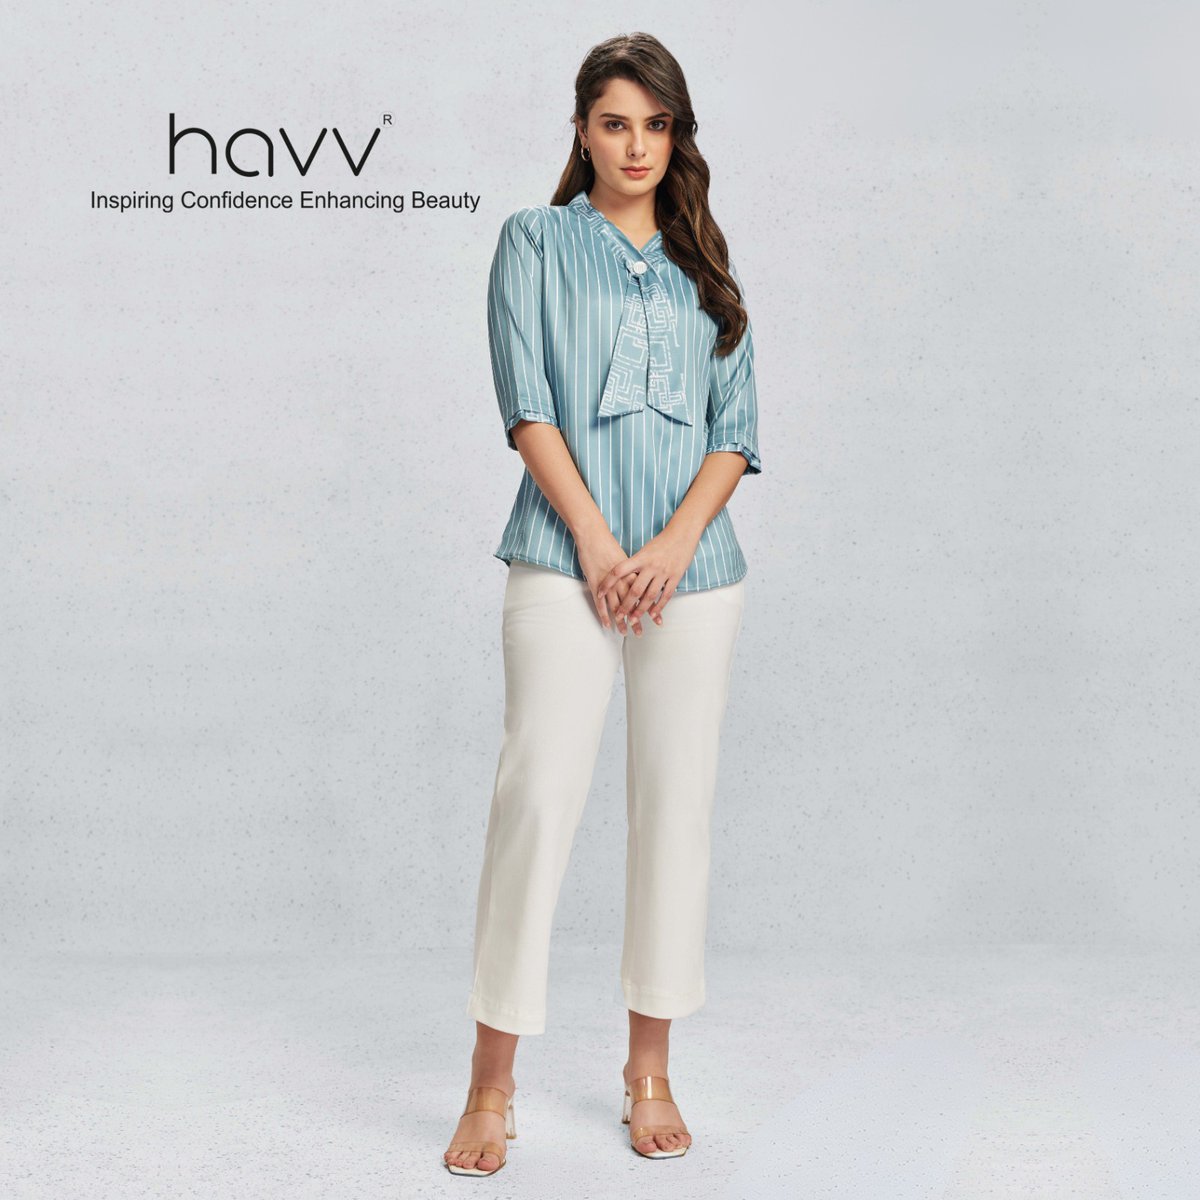 The perfect blend of sophistication and comfort. 🫶🫶

#WesternTopTrends #RanchReady #WesternBlouse #CowgirlFashion #TopOffTheRange #StylishShirts #FrontierFashion #TopNotchWestern #RodeoReady #WesternChic #havv